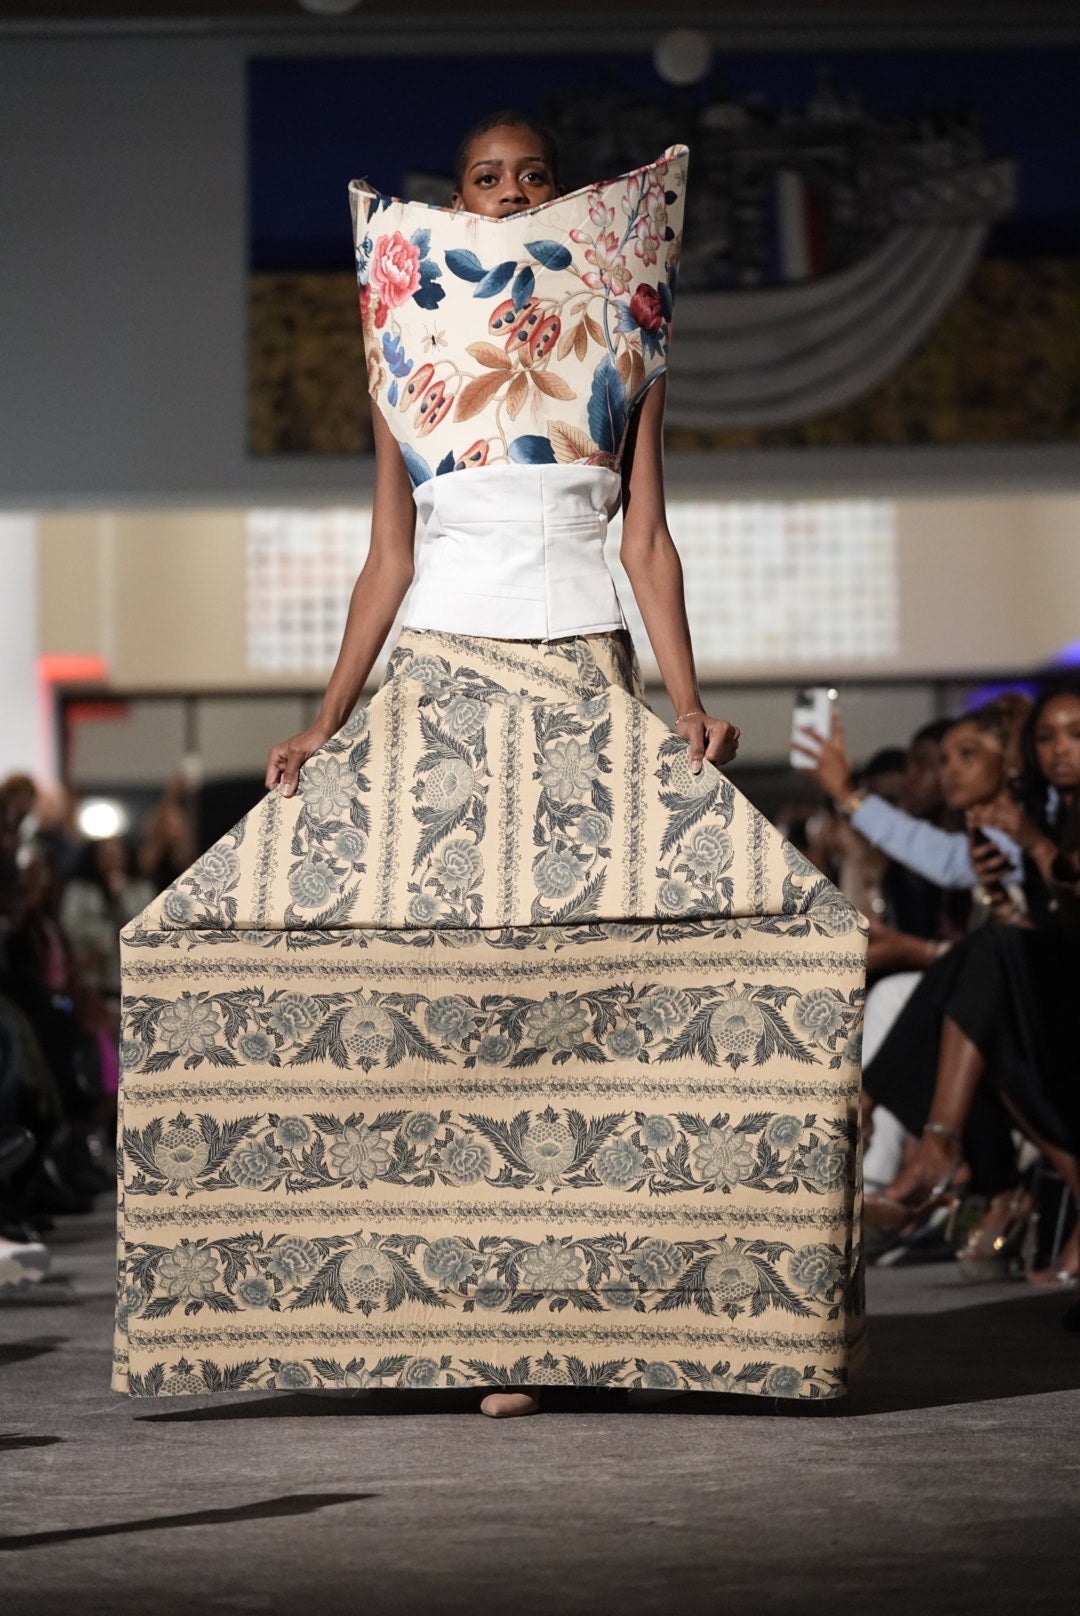 HBCUs Celebrate Battle Of Versailles With Sustainable Fashion